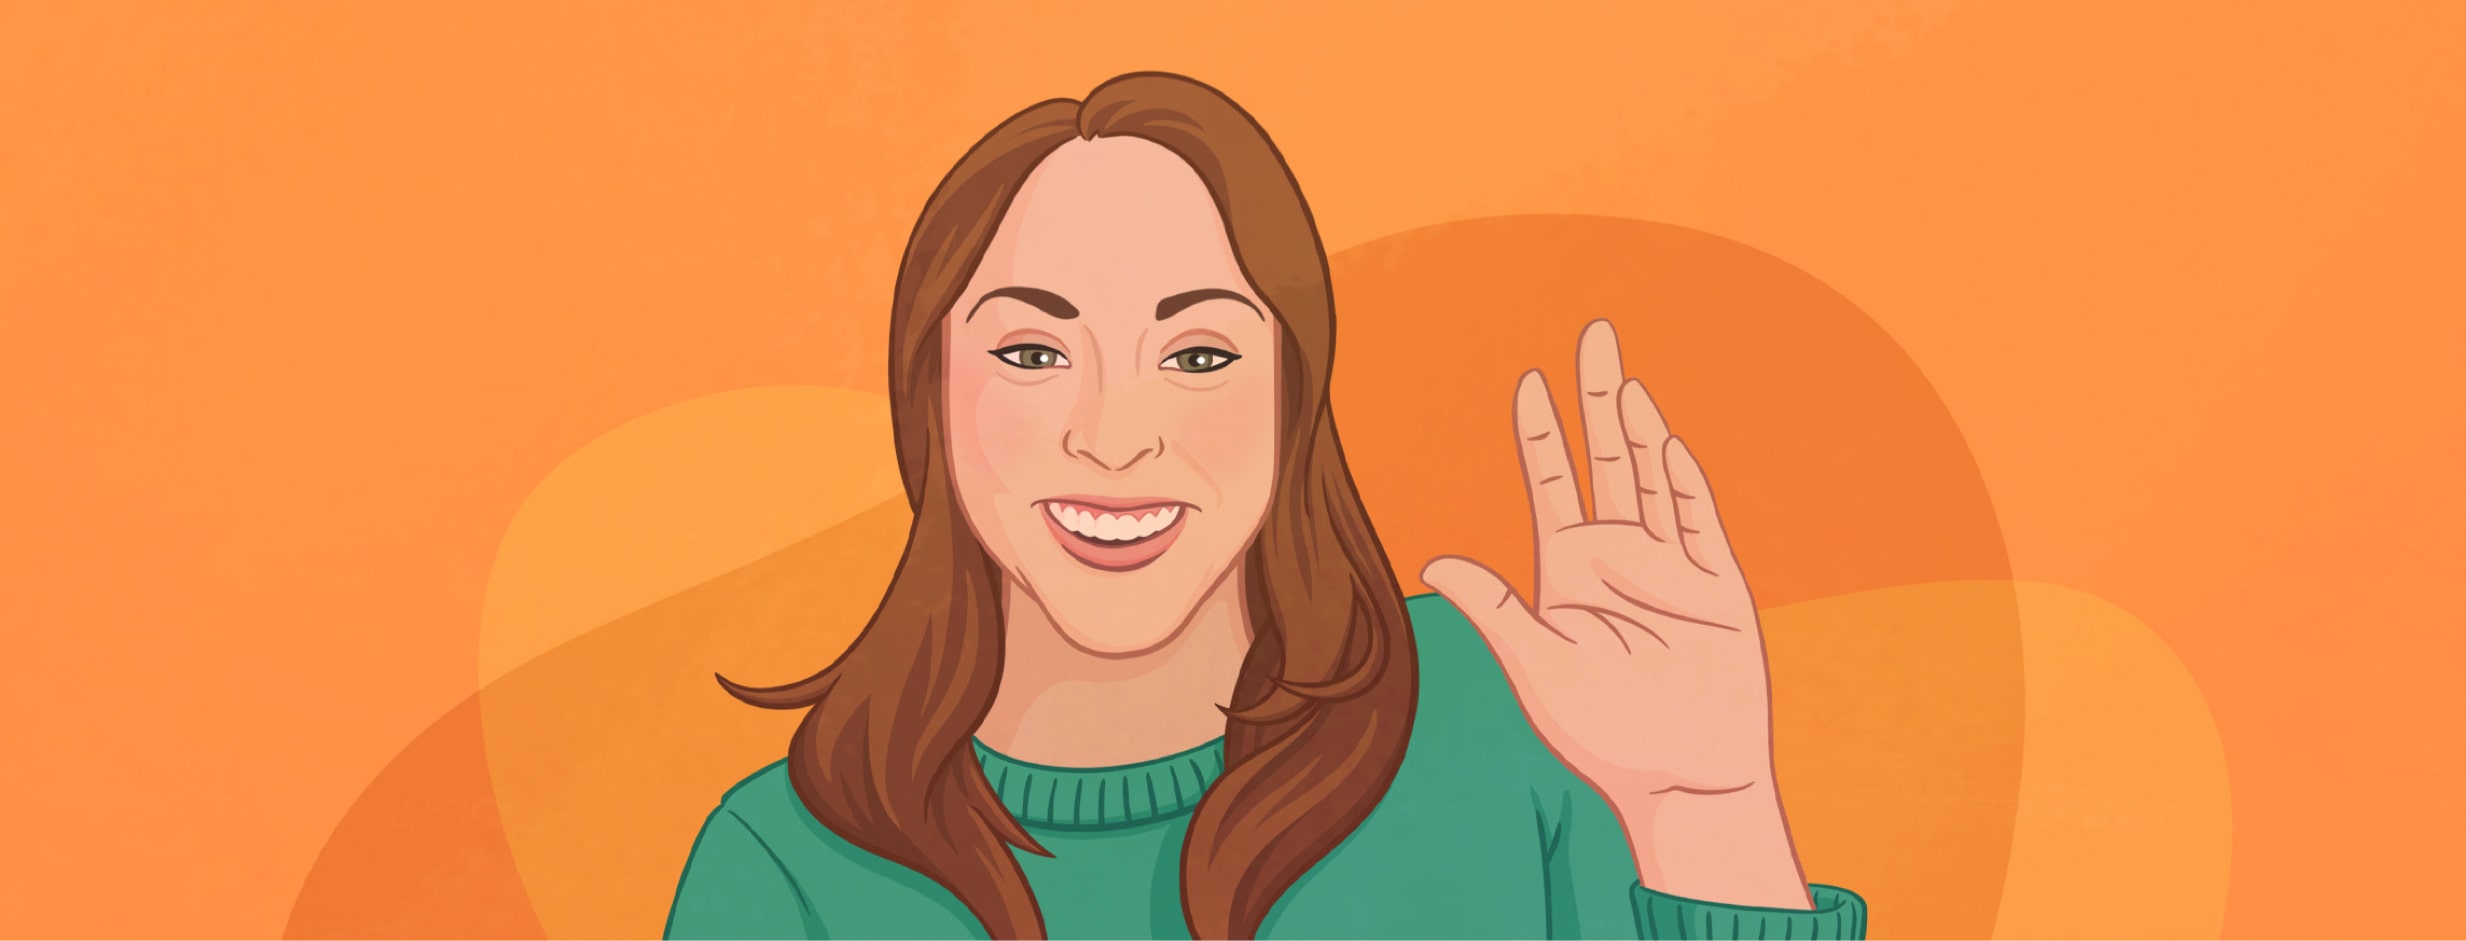 Claire Sachs waves against an orange background